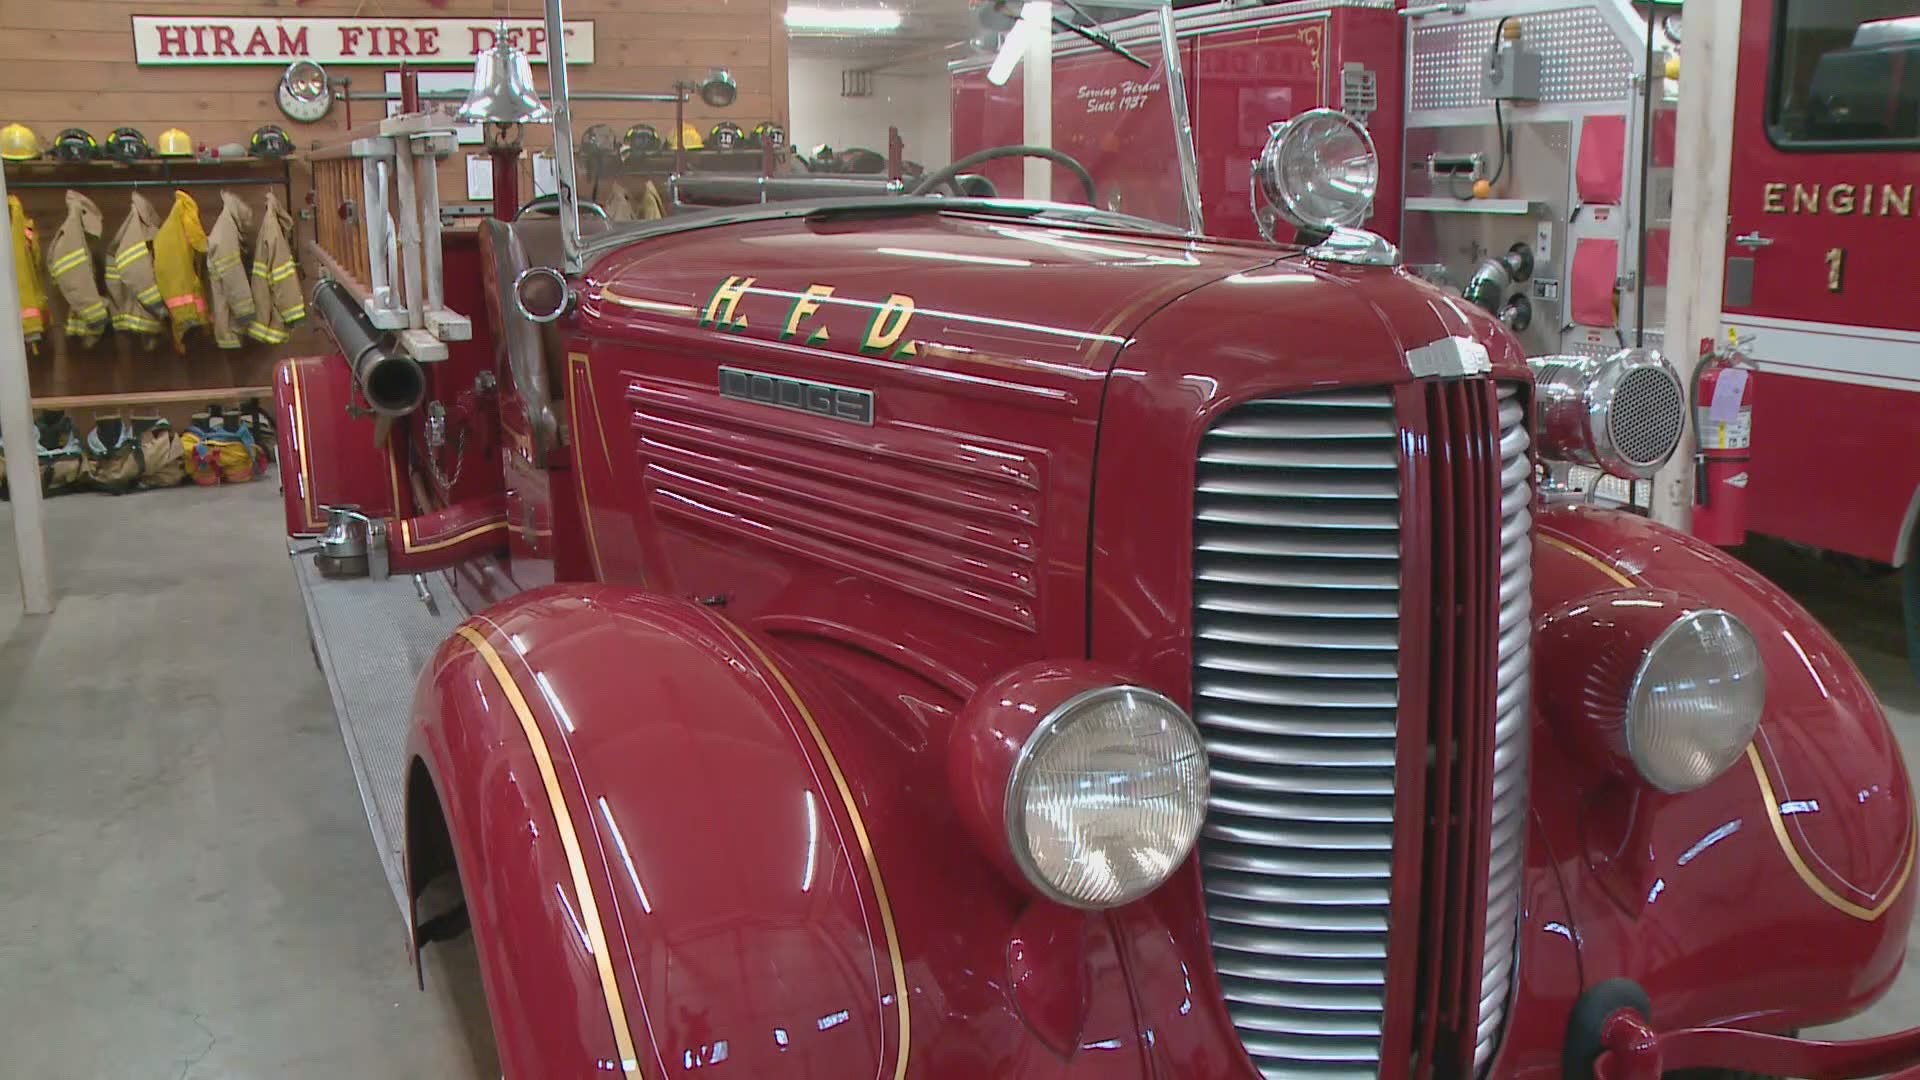 A piece of history: The Town of Hiram bought its first fire truck and built its fire department in 1937 at a cost of $6,000.